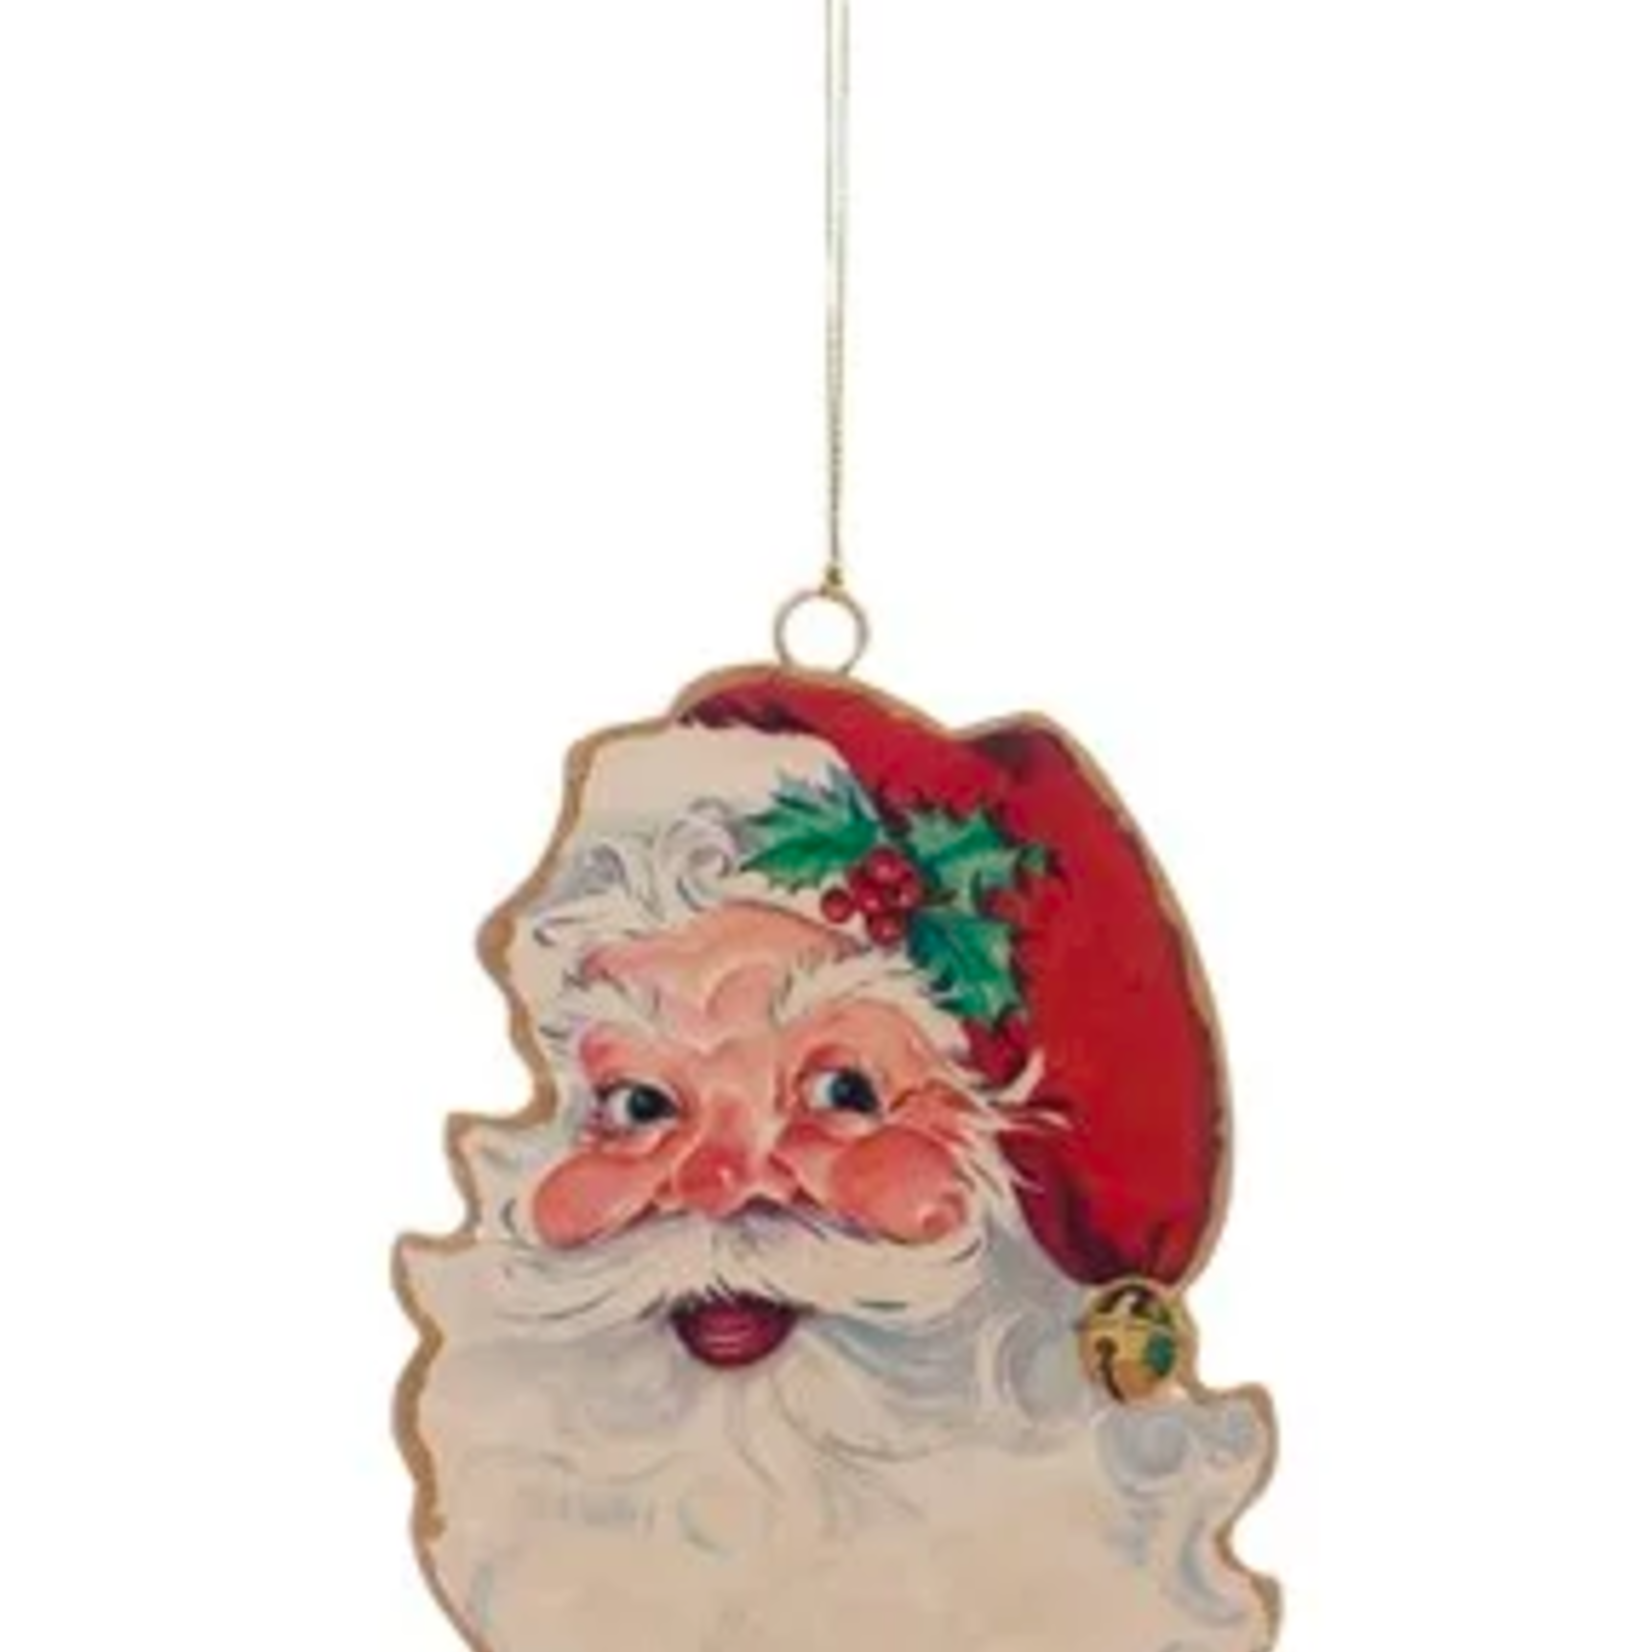 Creative Co-Op Vintage Reproduction 2-Sided Metal Santa Ornament